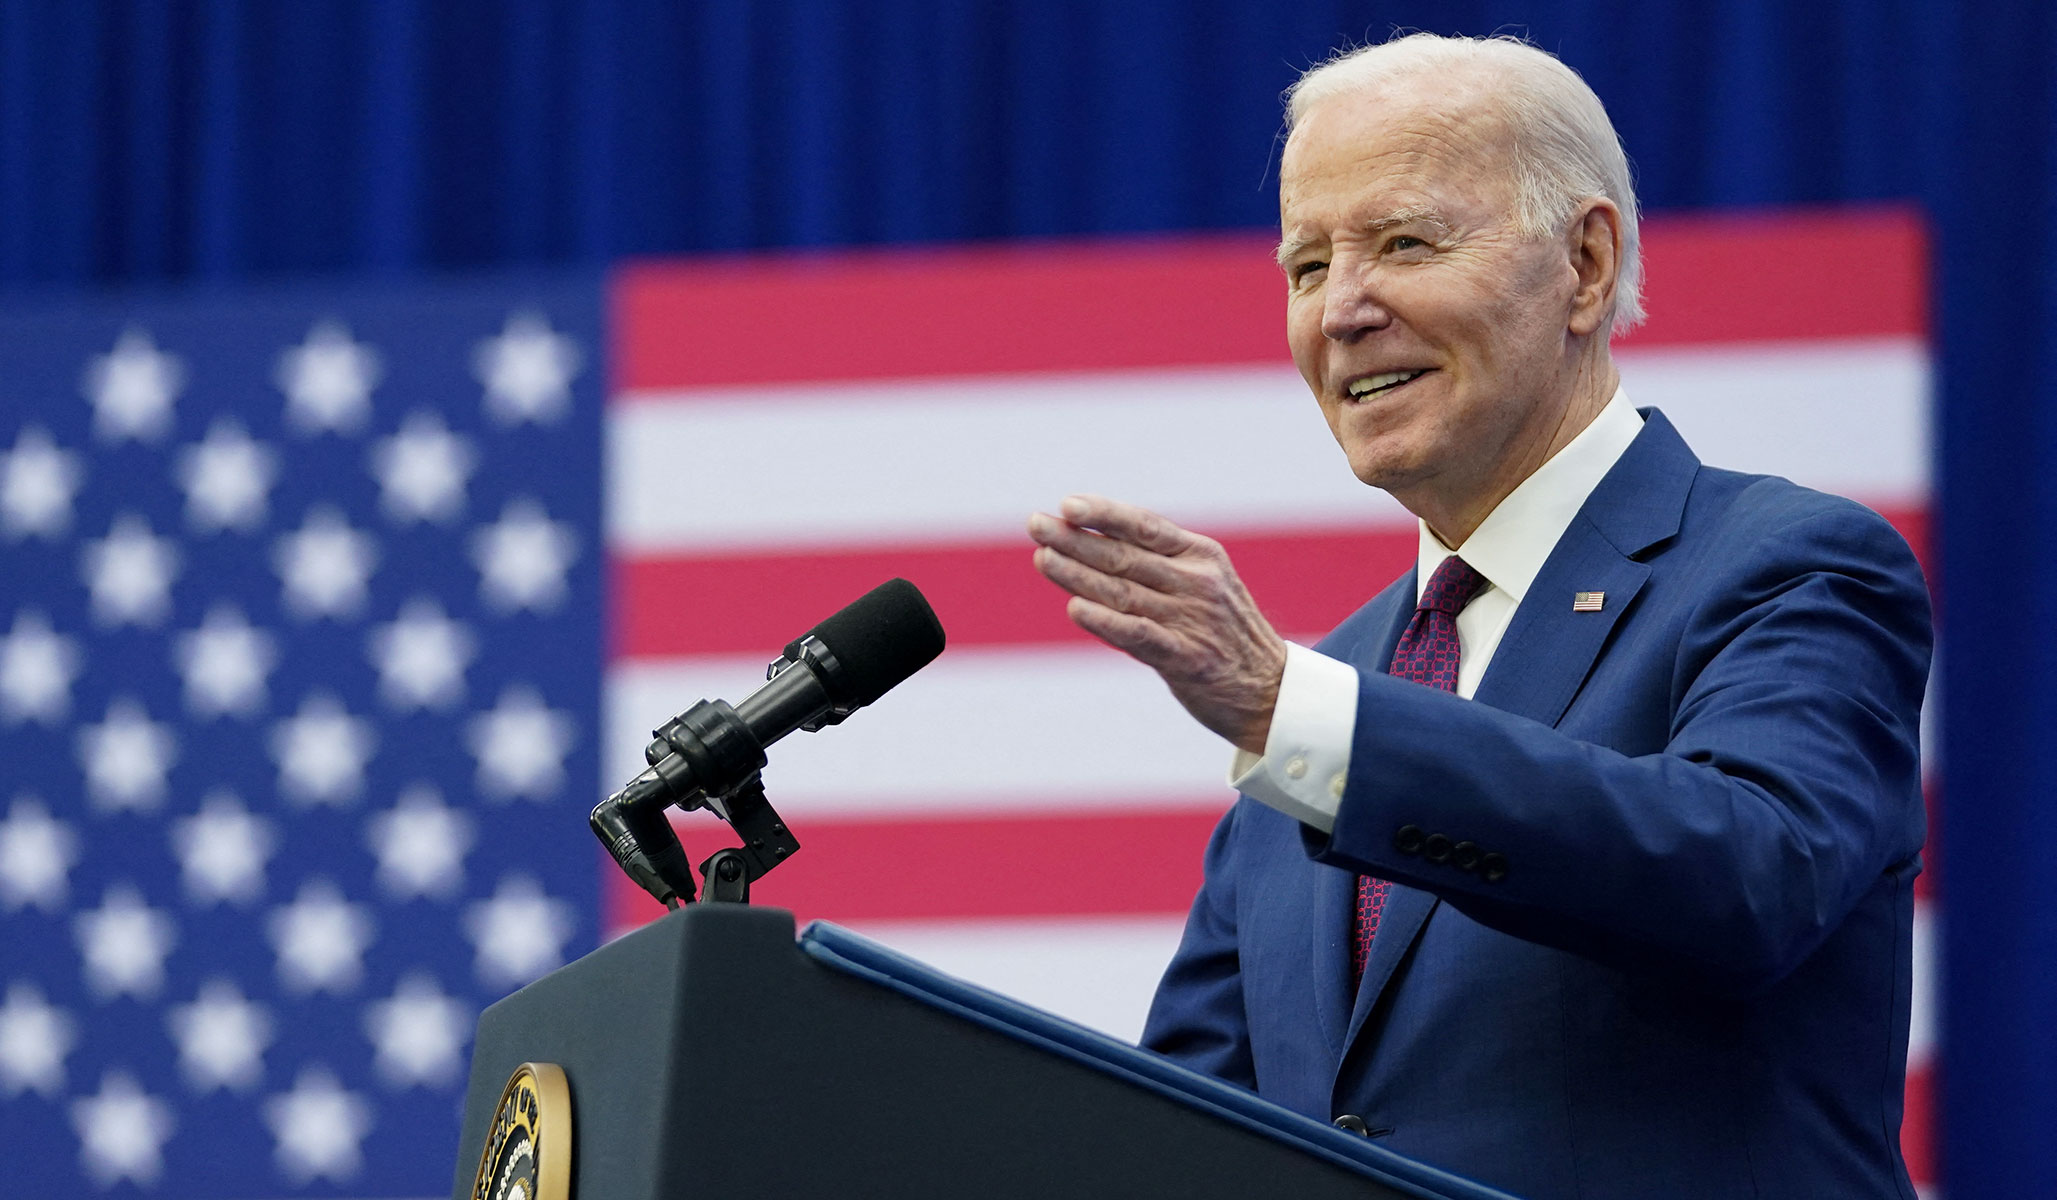 Biden Clinches Democratic Presidential Nomination as Trump Closes In on GOP Nomination